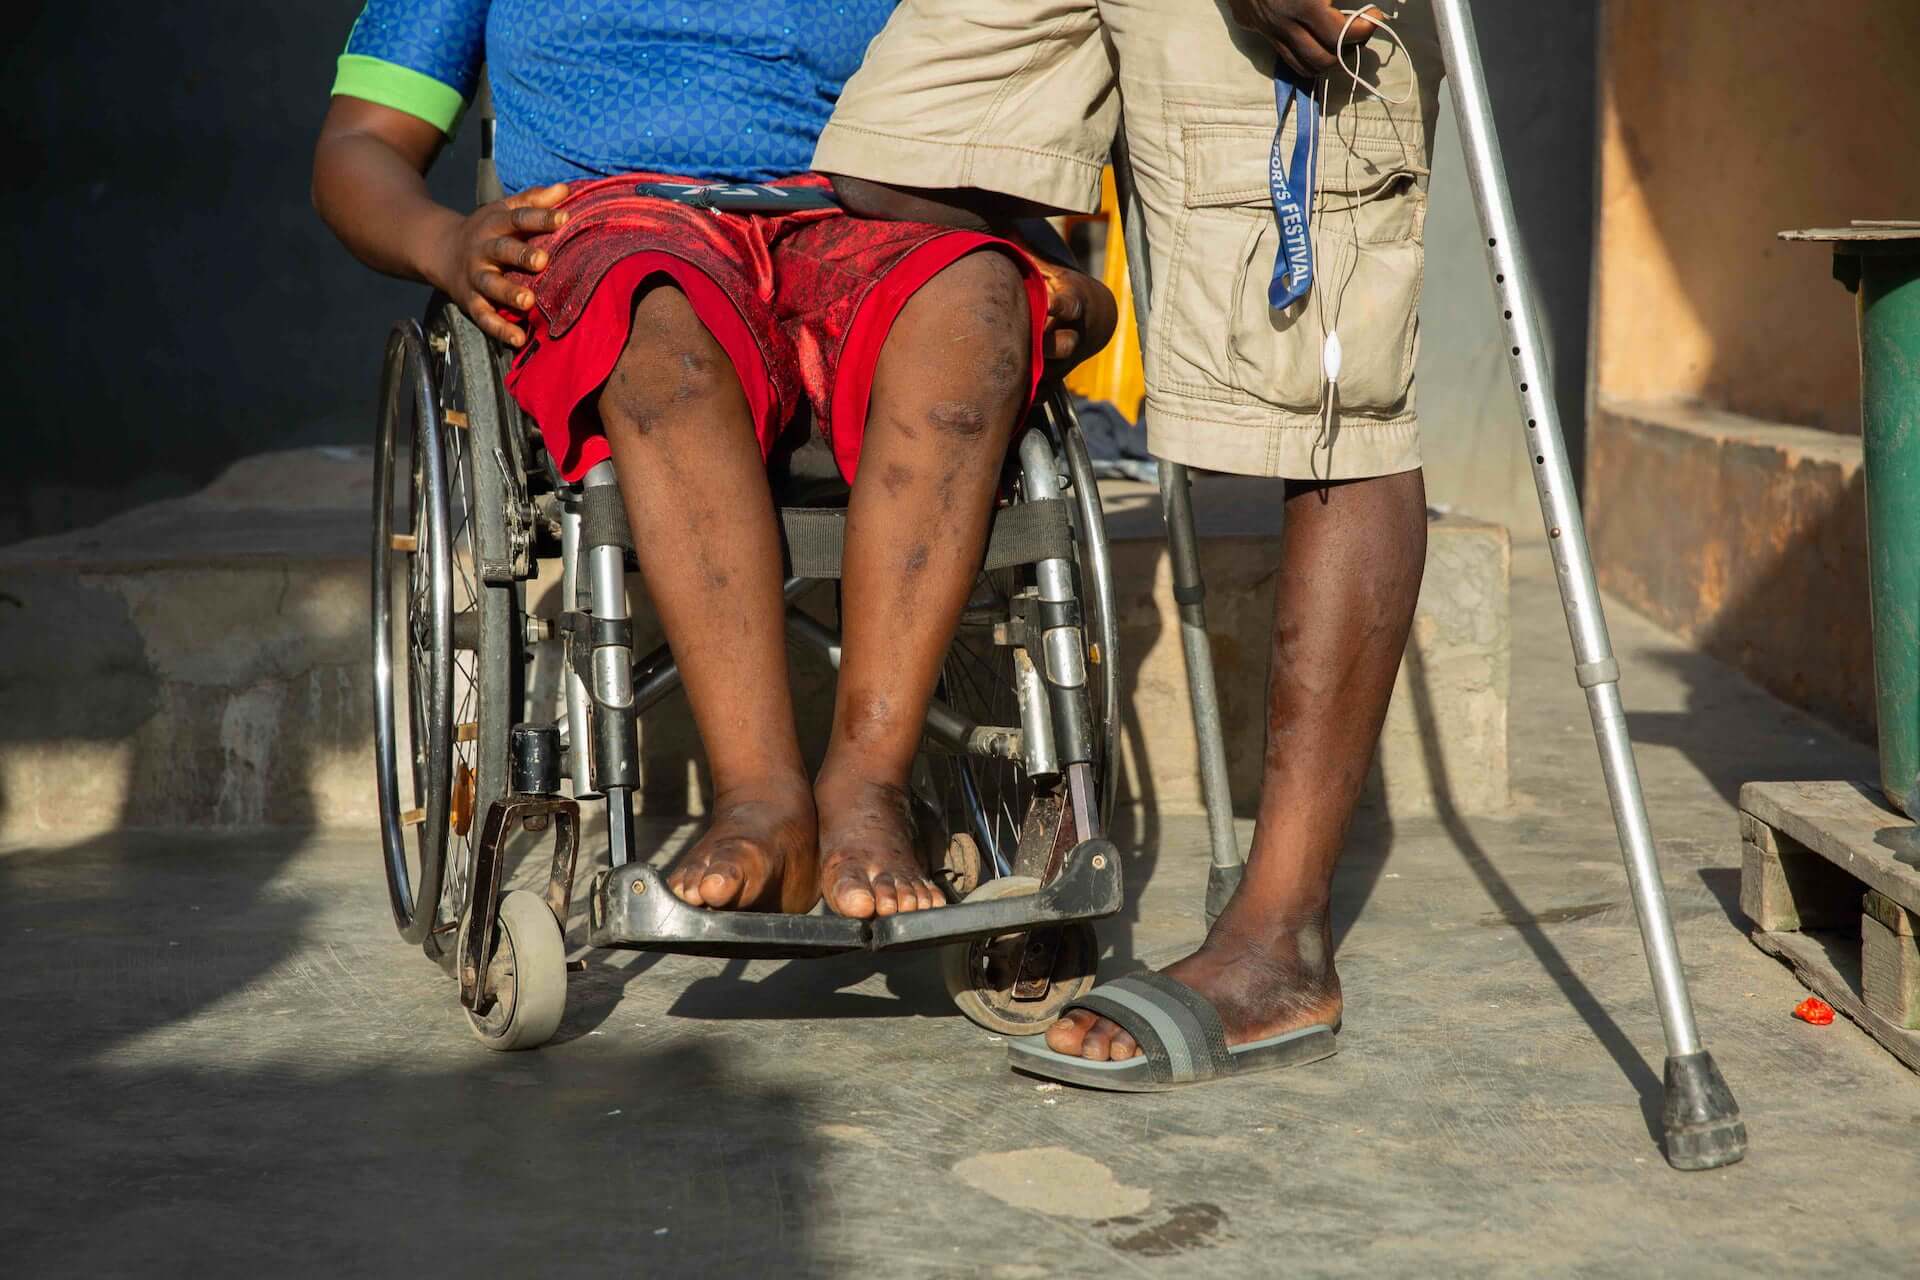 A photo of Olajumoke’s and Suraju’s legs. She sits in her wheelchair and he stands next to her, resting his amputated leg on her knee.